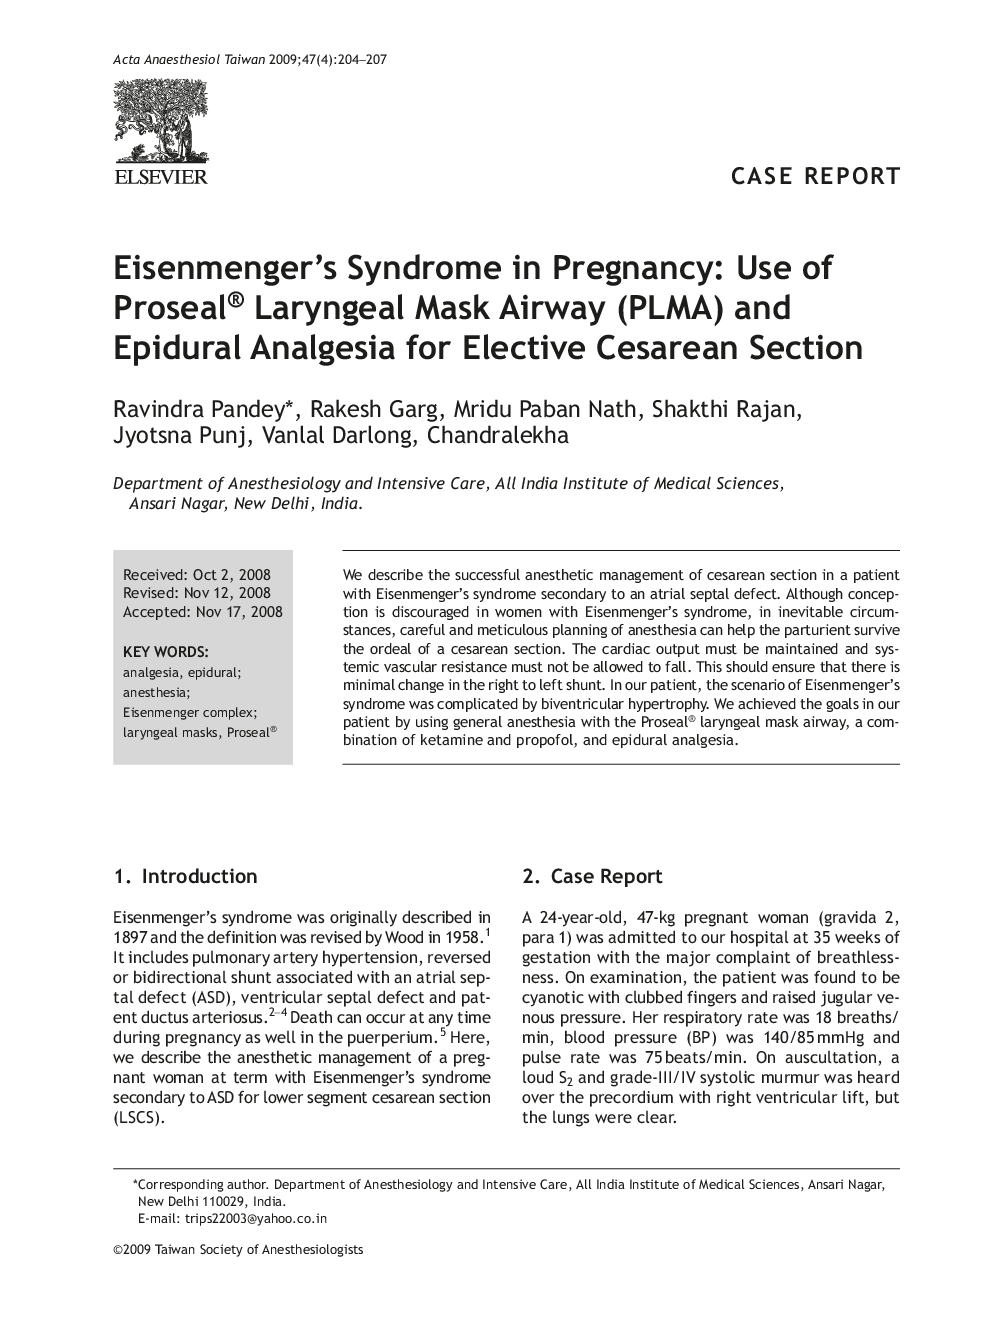 Eisenmenger's Syndrome in Pregnancy: Use of Proseal® Laryngeal Mask Airway (PLMA) and Epidural Analgesia for Elective Cesarean Section